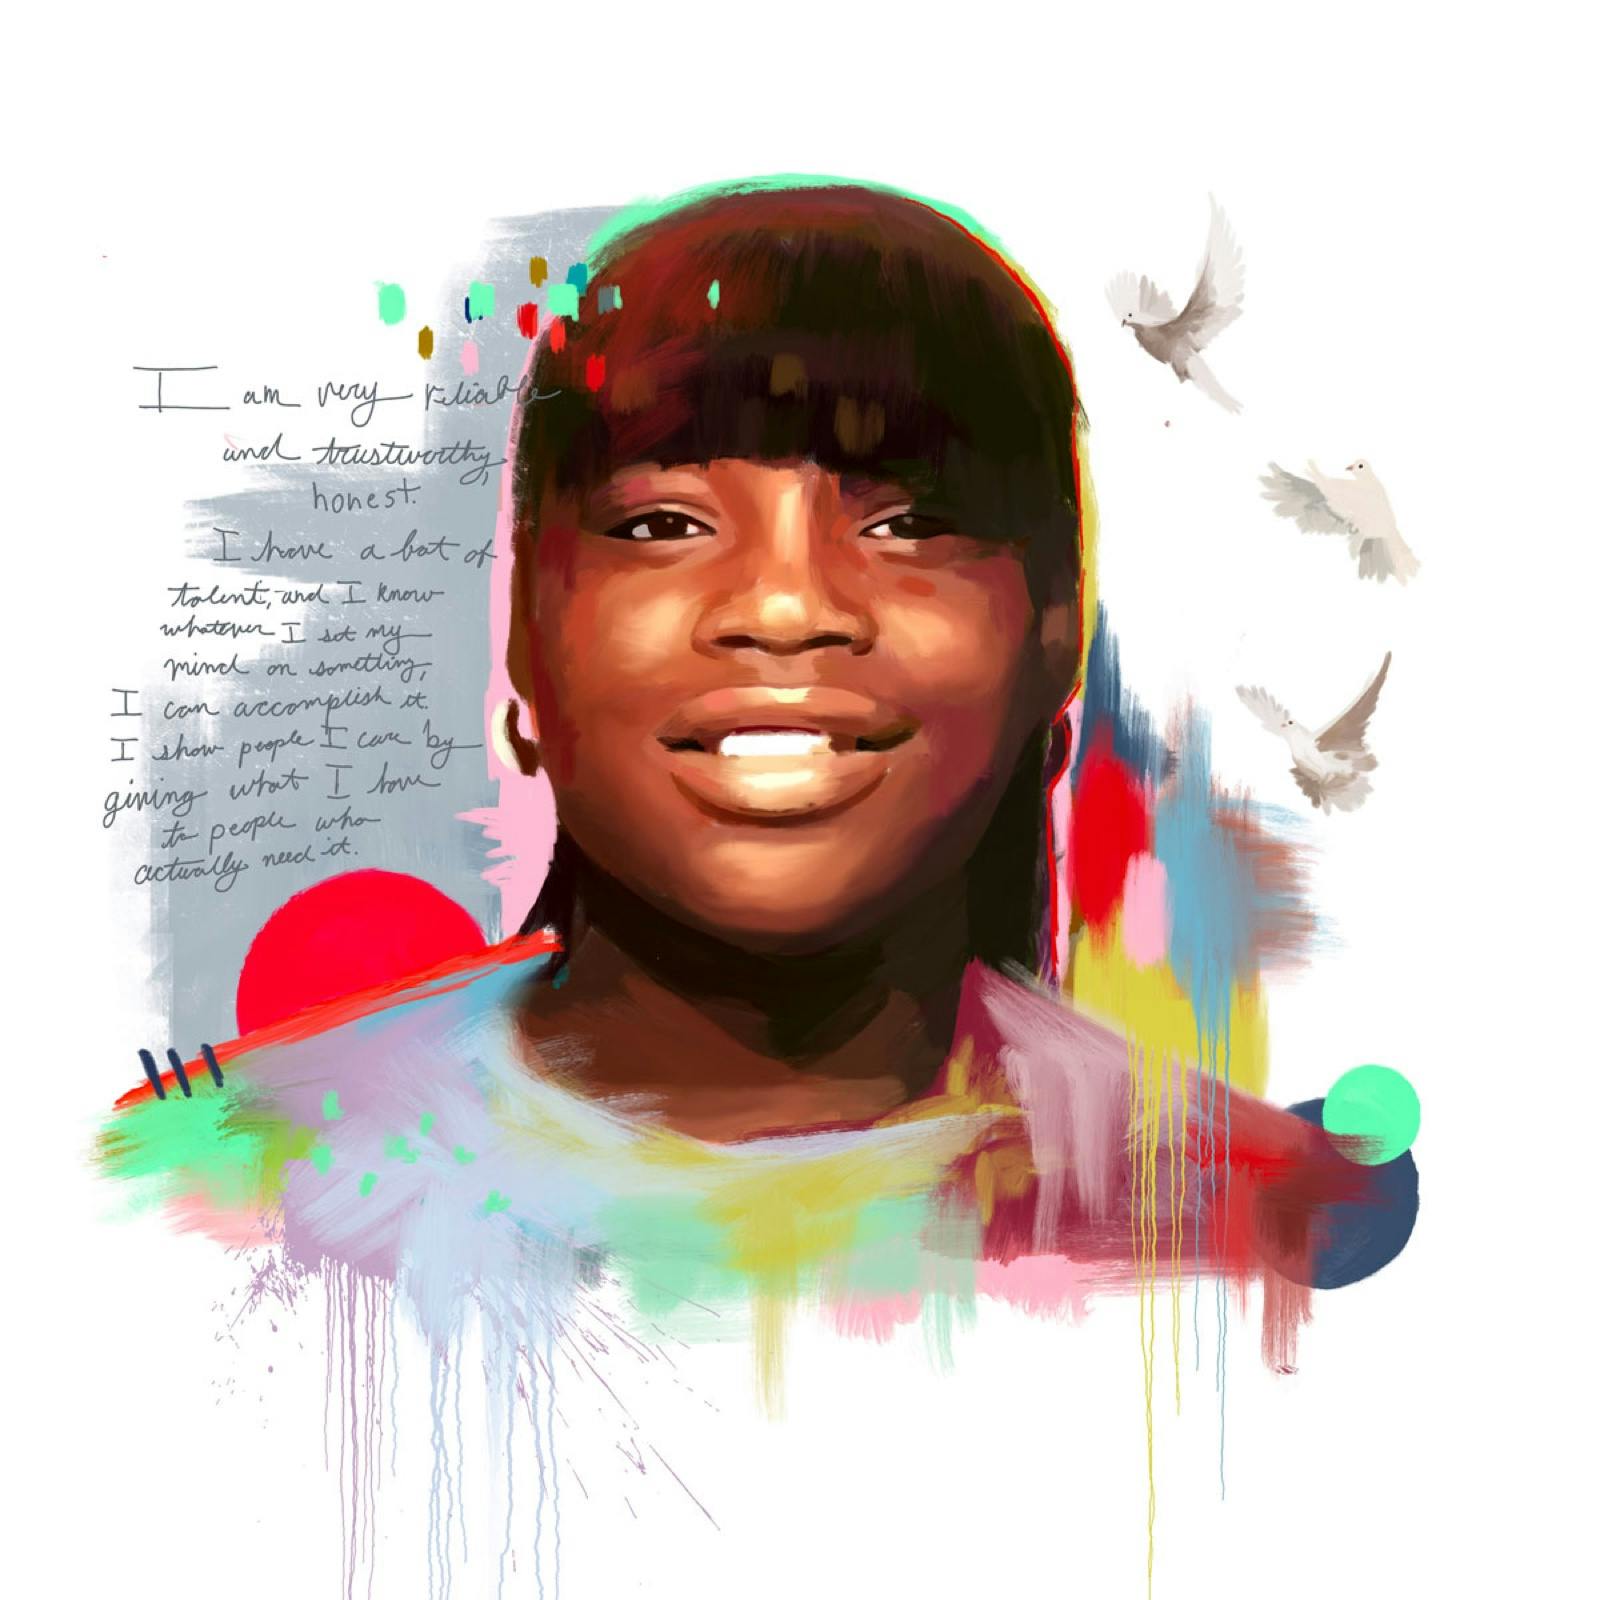 A colorful painted portrait of Latasha Harlins as a young teenager, smiling. Three doves fly on her left. On her right is featured an excerpt of a poem she wrote in February 1991. It reads: “I am very reliable and trustworthy, honest. I have a lot of talent, and I know whatever I set my mind on something, I can accomplish it. I show people I care by giving what I have to people who actually need it.” 